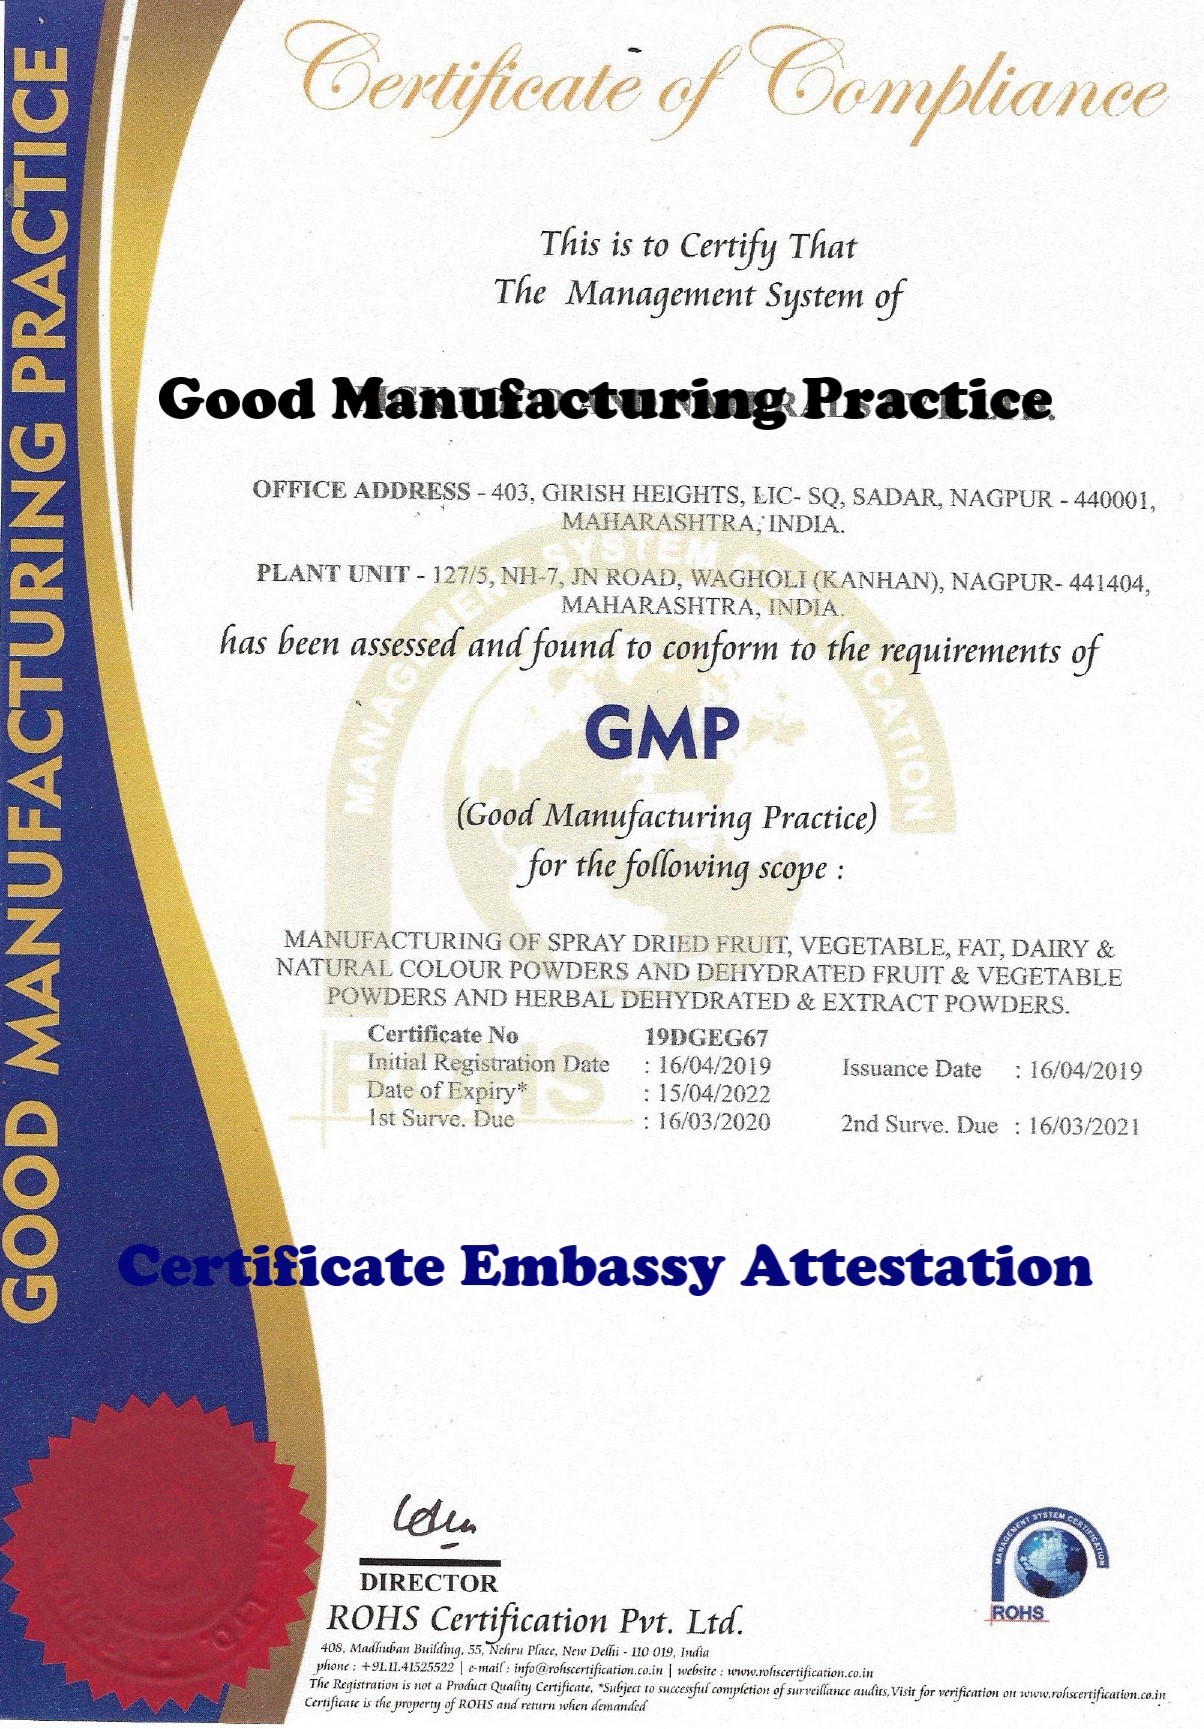 GMP Certificate Attestation from Israel Embassy